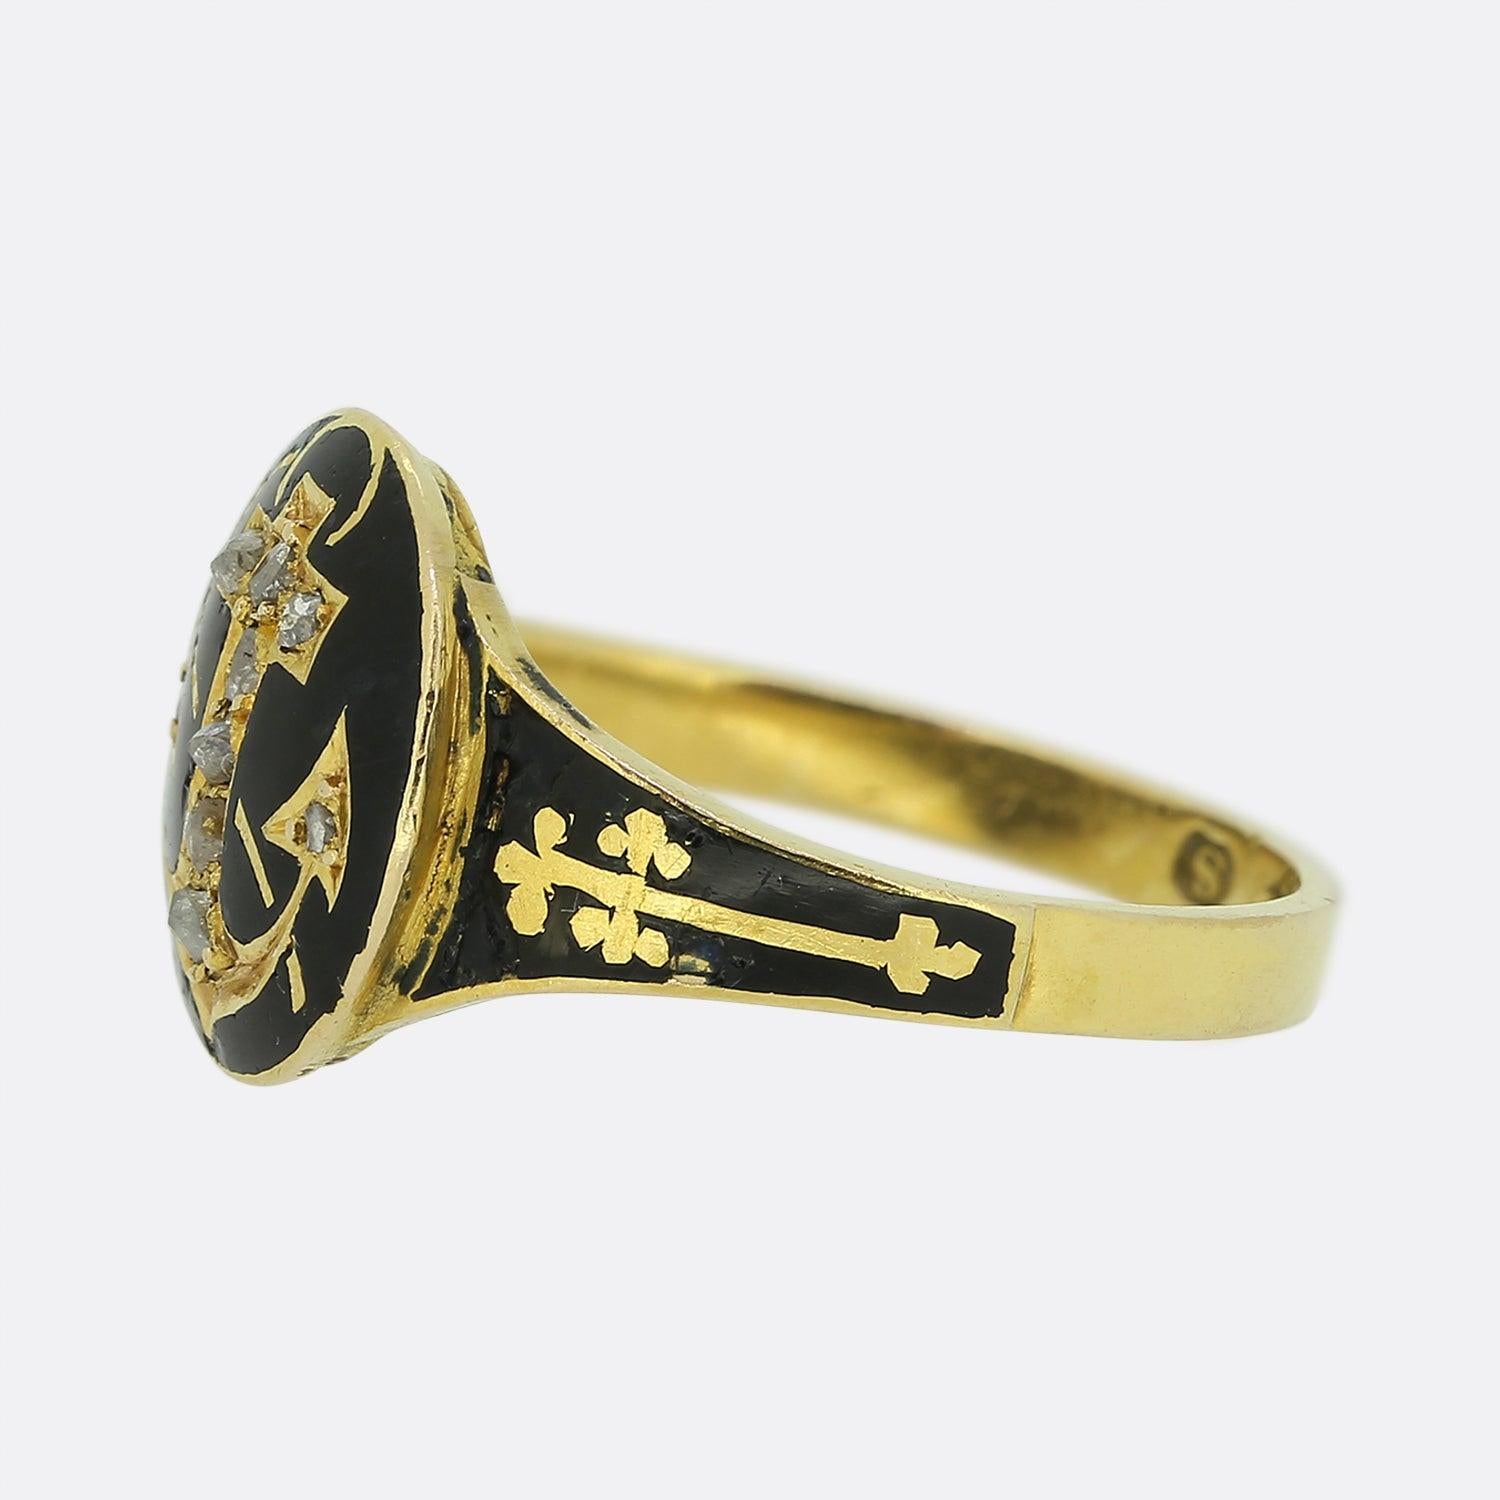 Here we have an excellently hand crafted signet ring dating back to the Victorian period. A deeply engraved depiction of an anchor dominates the centre the face with an array of rose cut diamonds neatly nestled within. Black enamel fills the